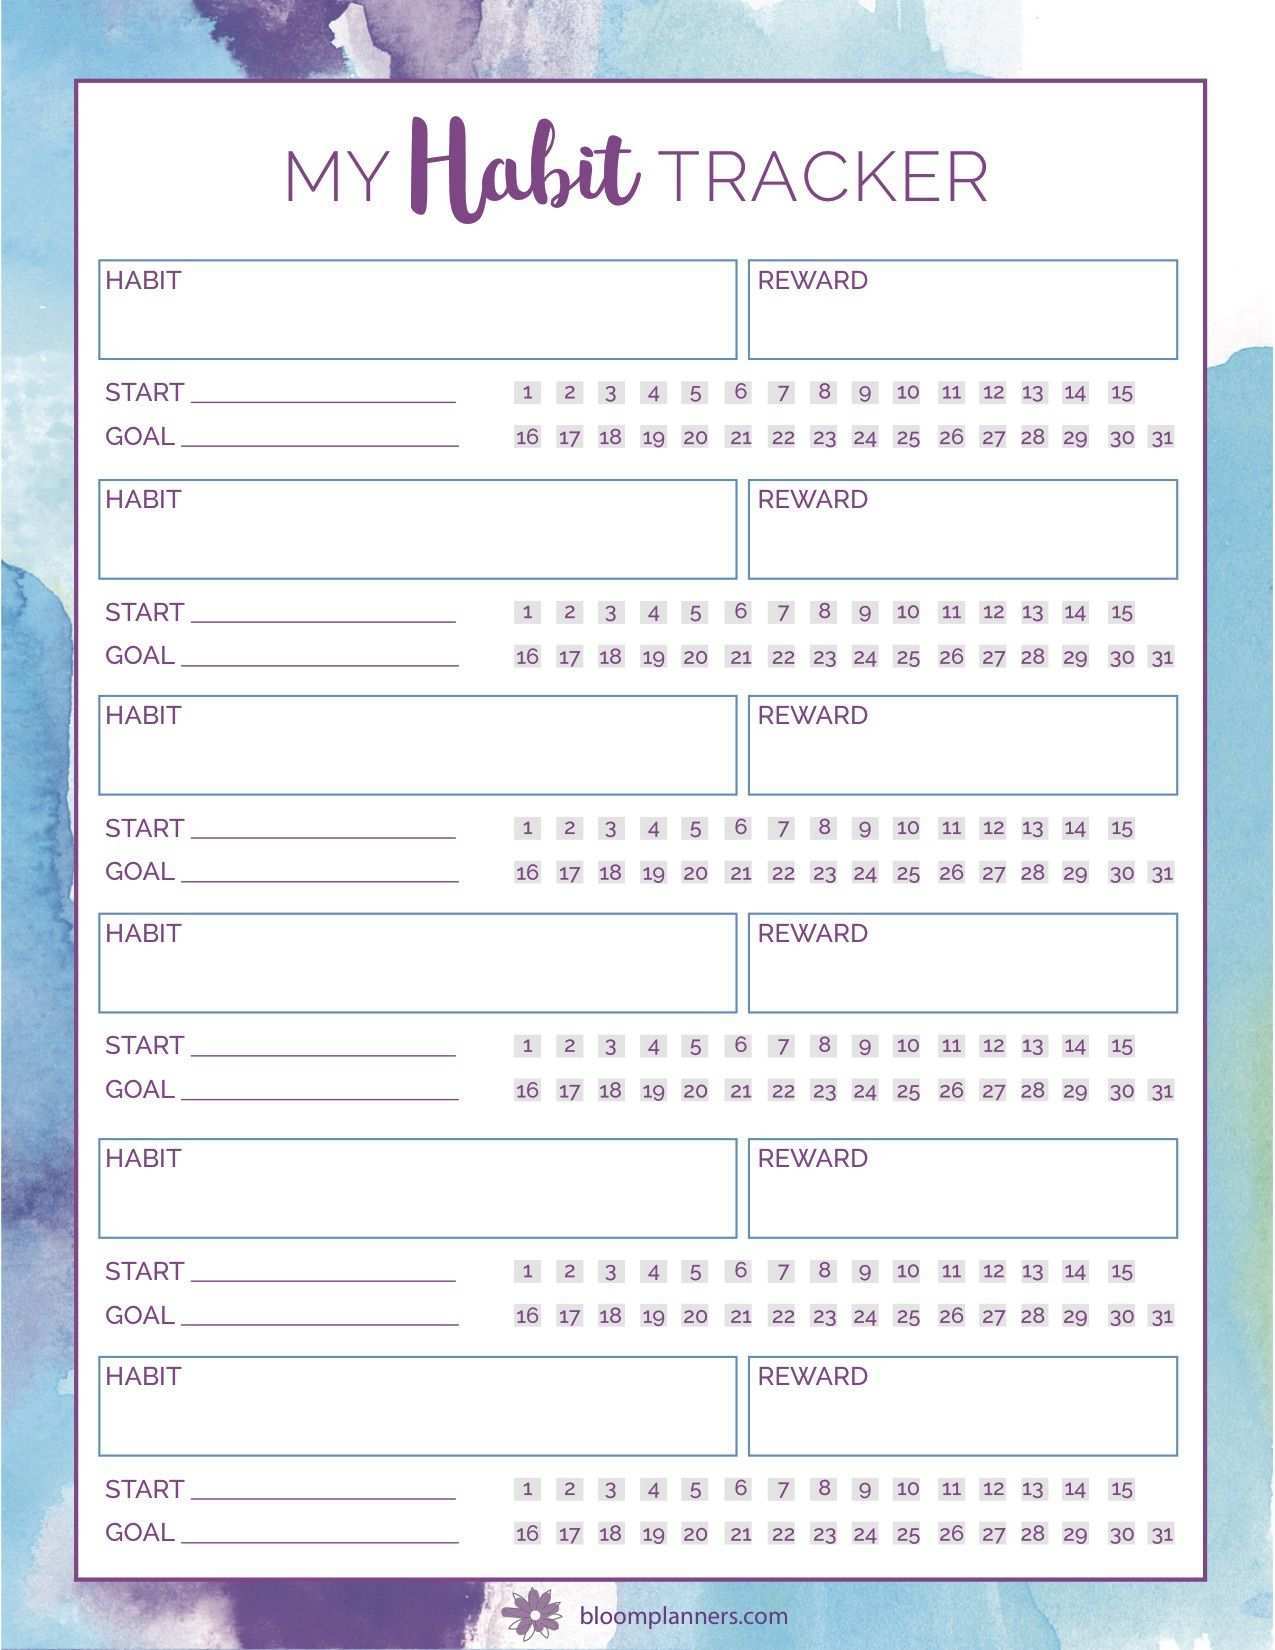 Free Printable Habit Tracker From Bloom Daily Planners Free 8 5 X 11 Pdf Planner Pages Planner Printables Free Habit Tracker Bullet Journal